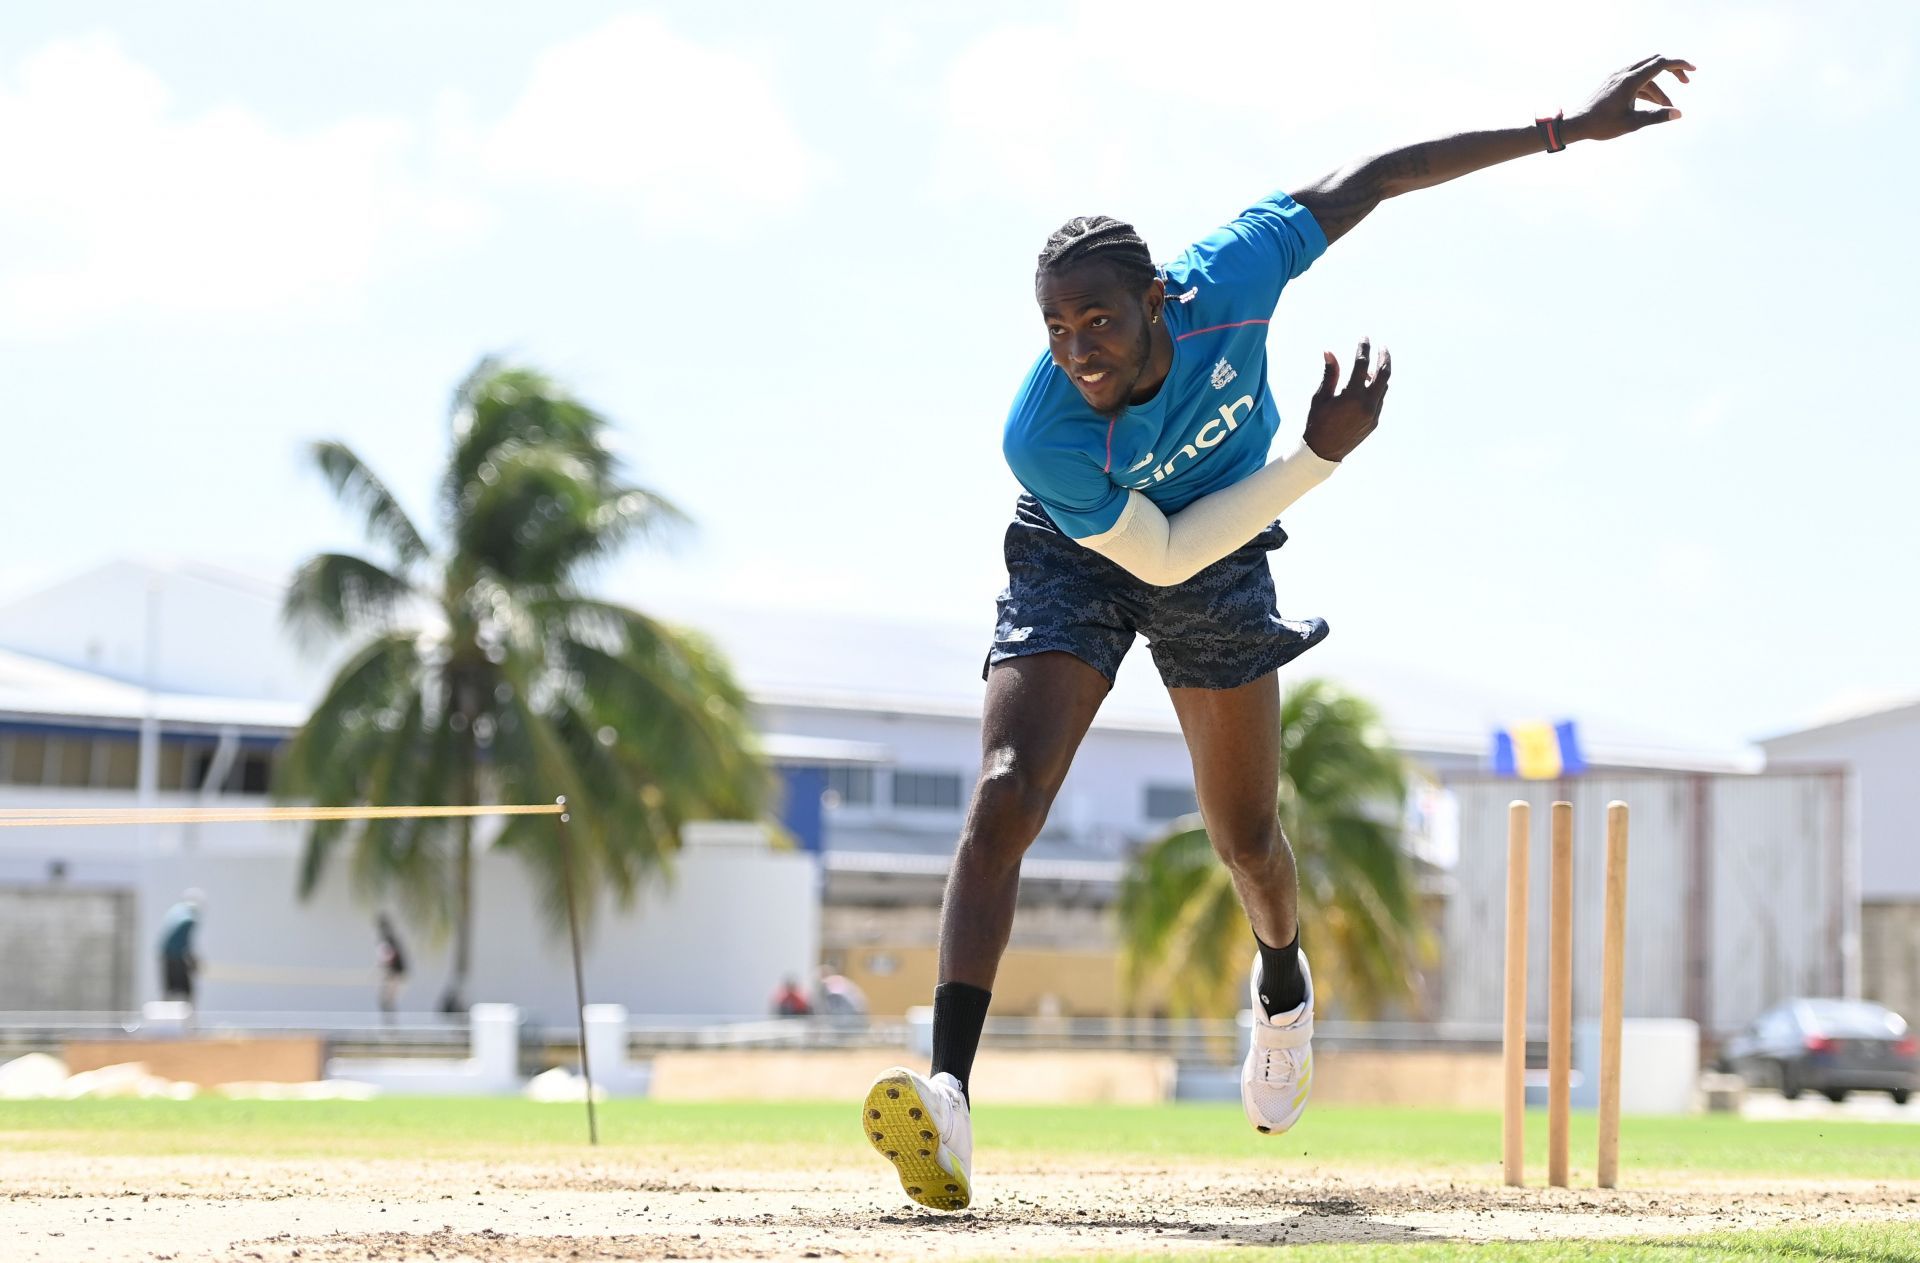 The Mumbai Indians bought Jofra Archer at ₹8 crore in the IPL 2022 auction.